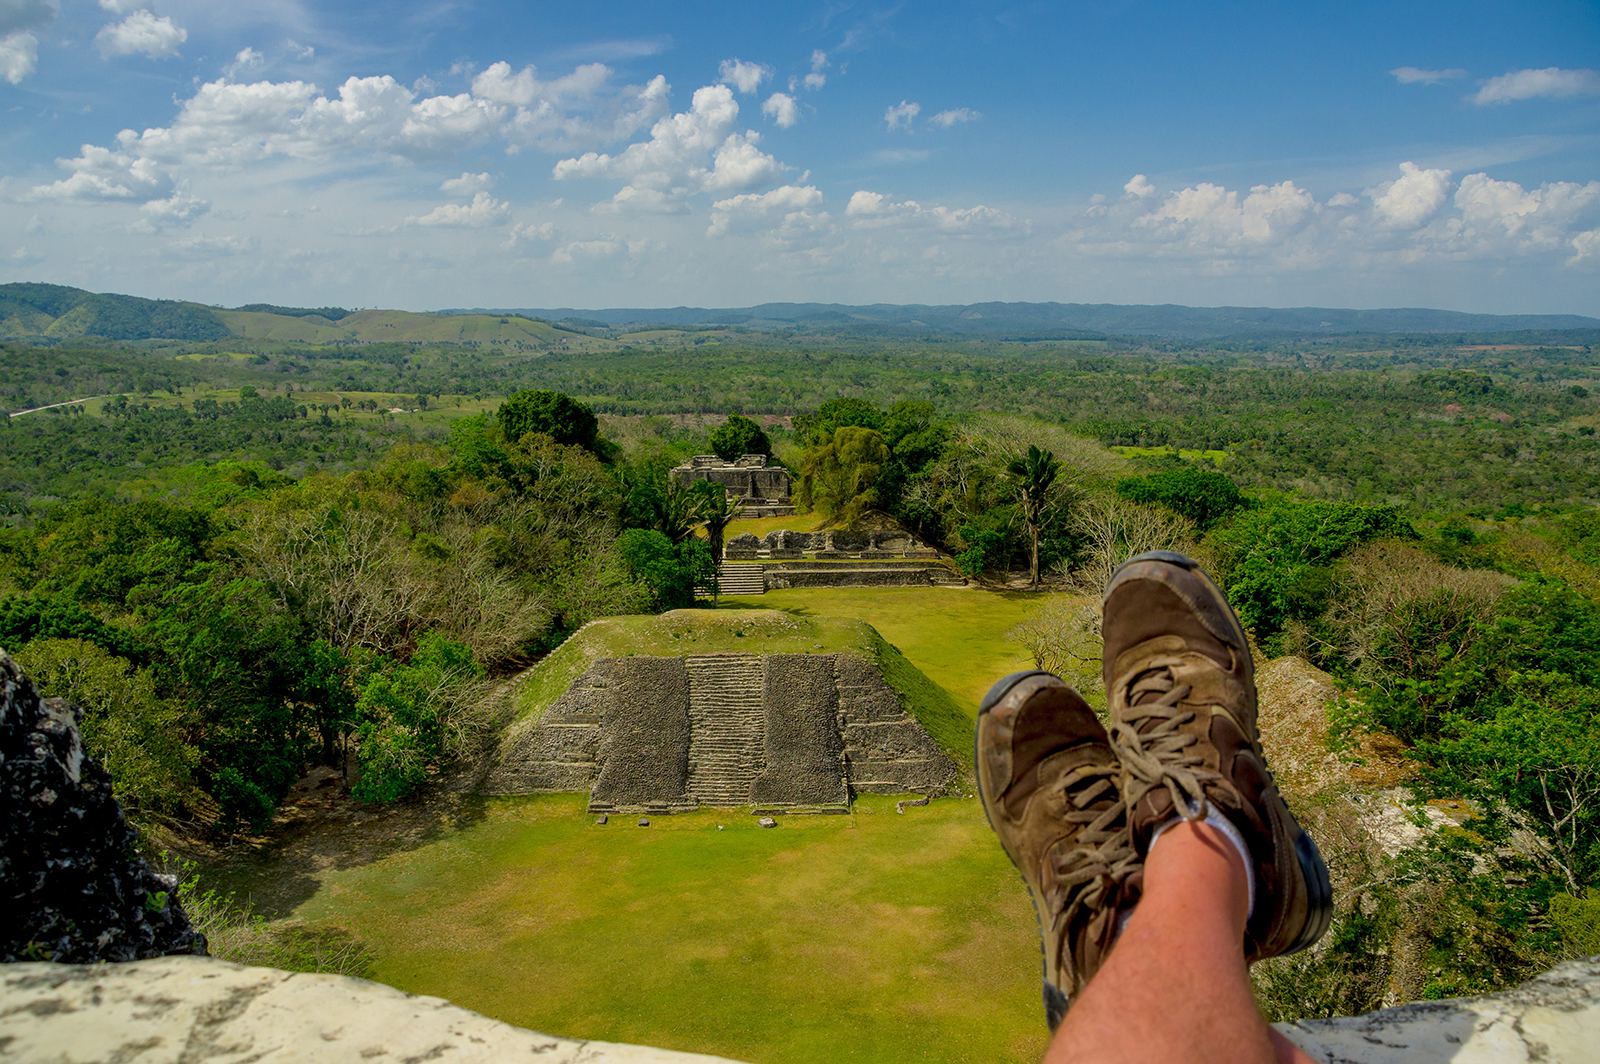 View of ancient ruins in Belize